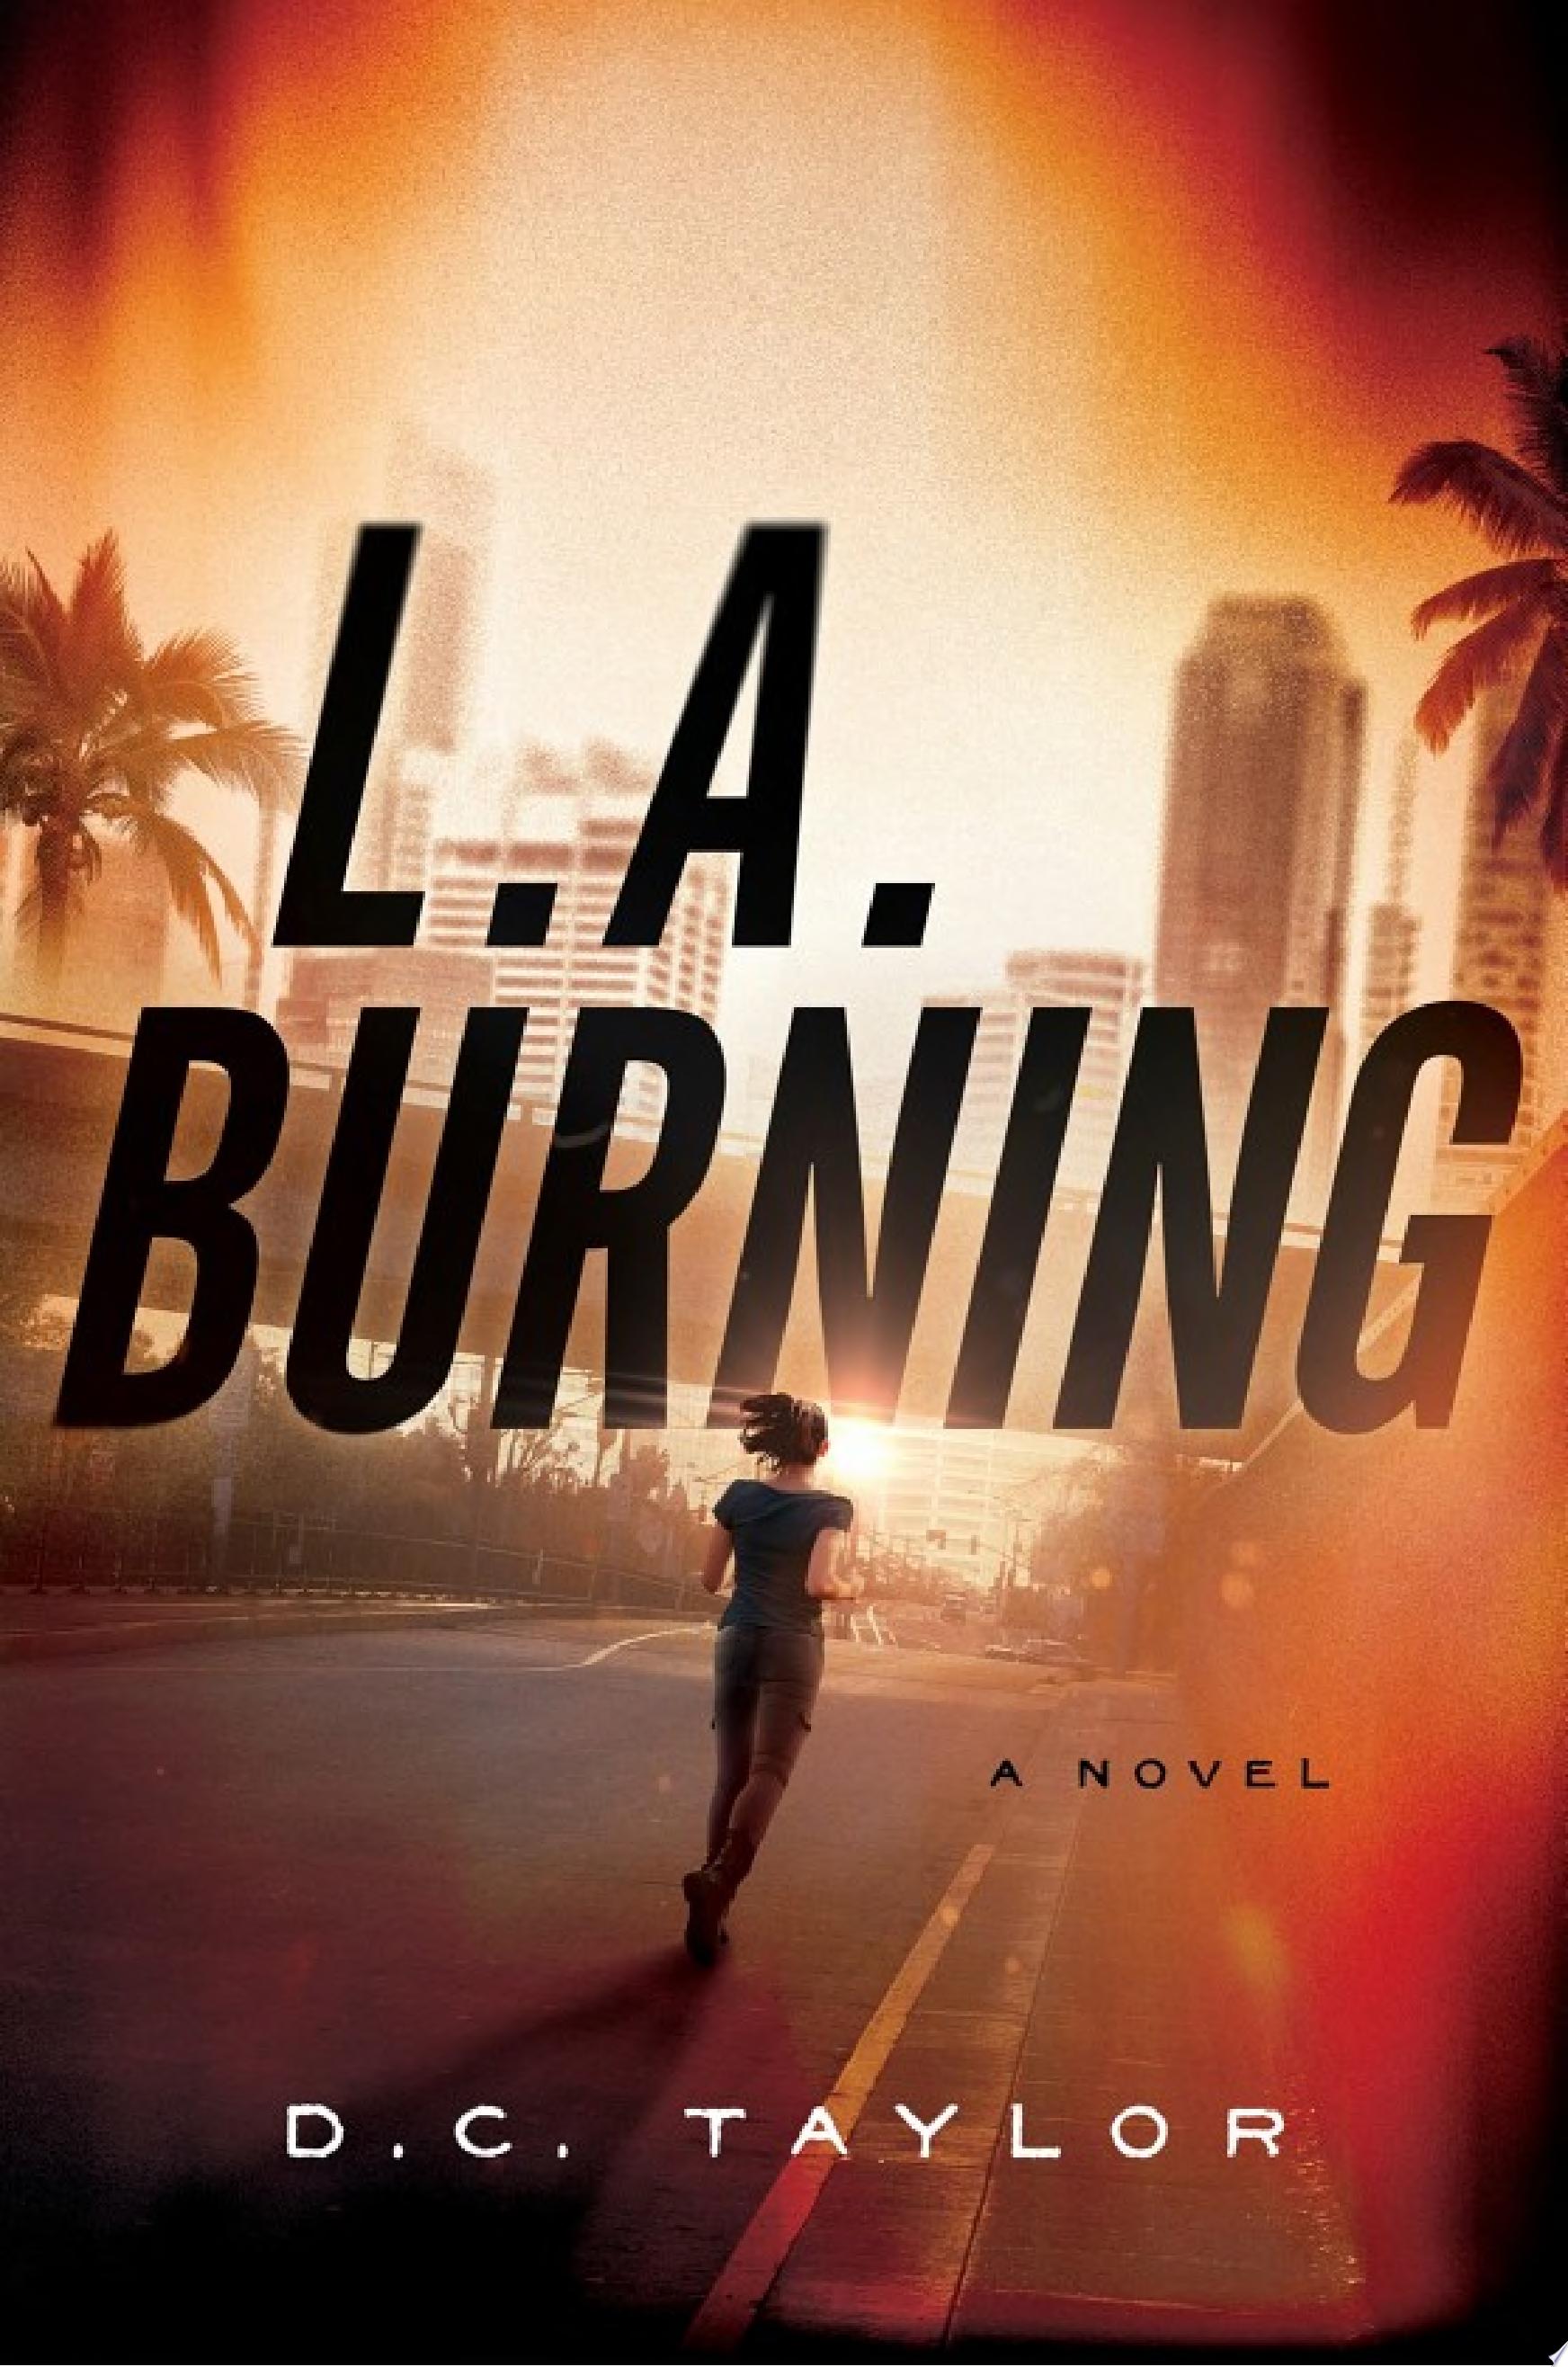 Image for "L.A. Burning"